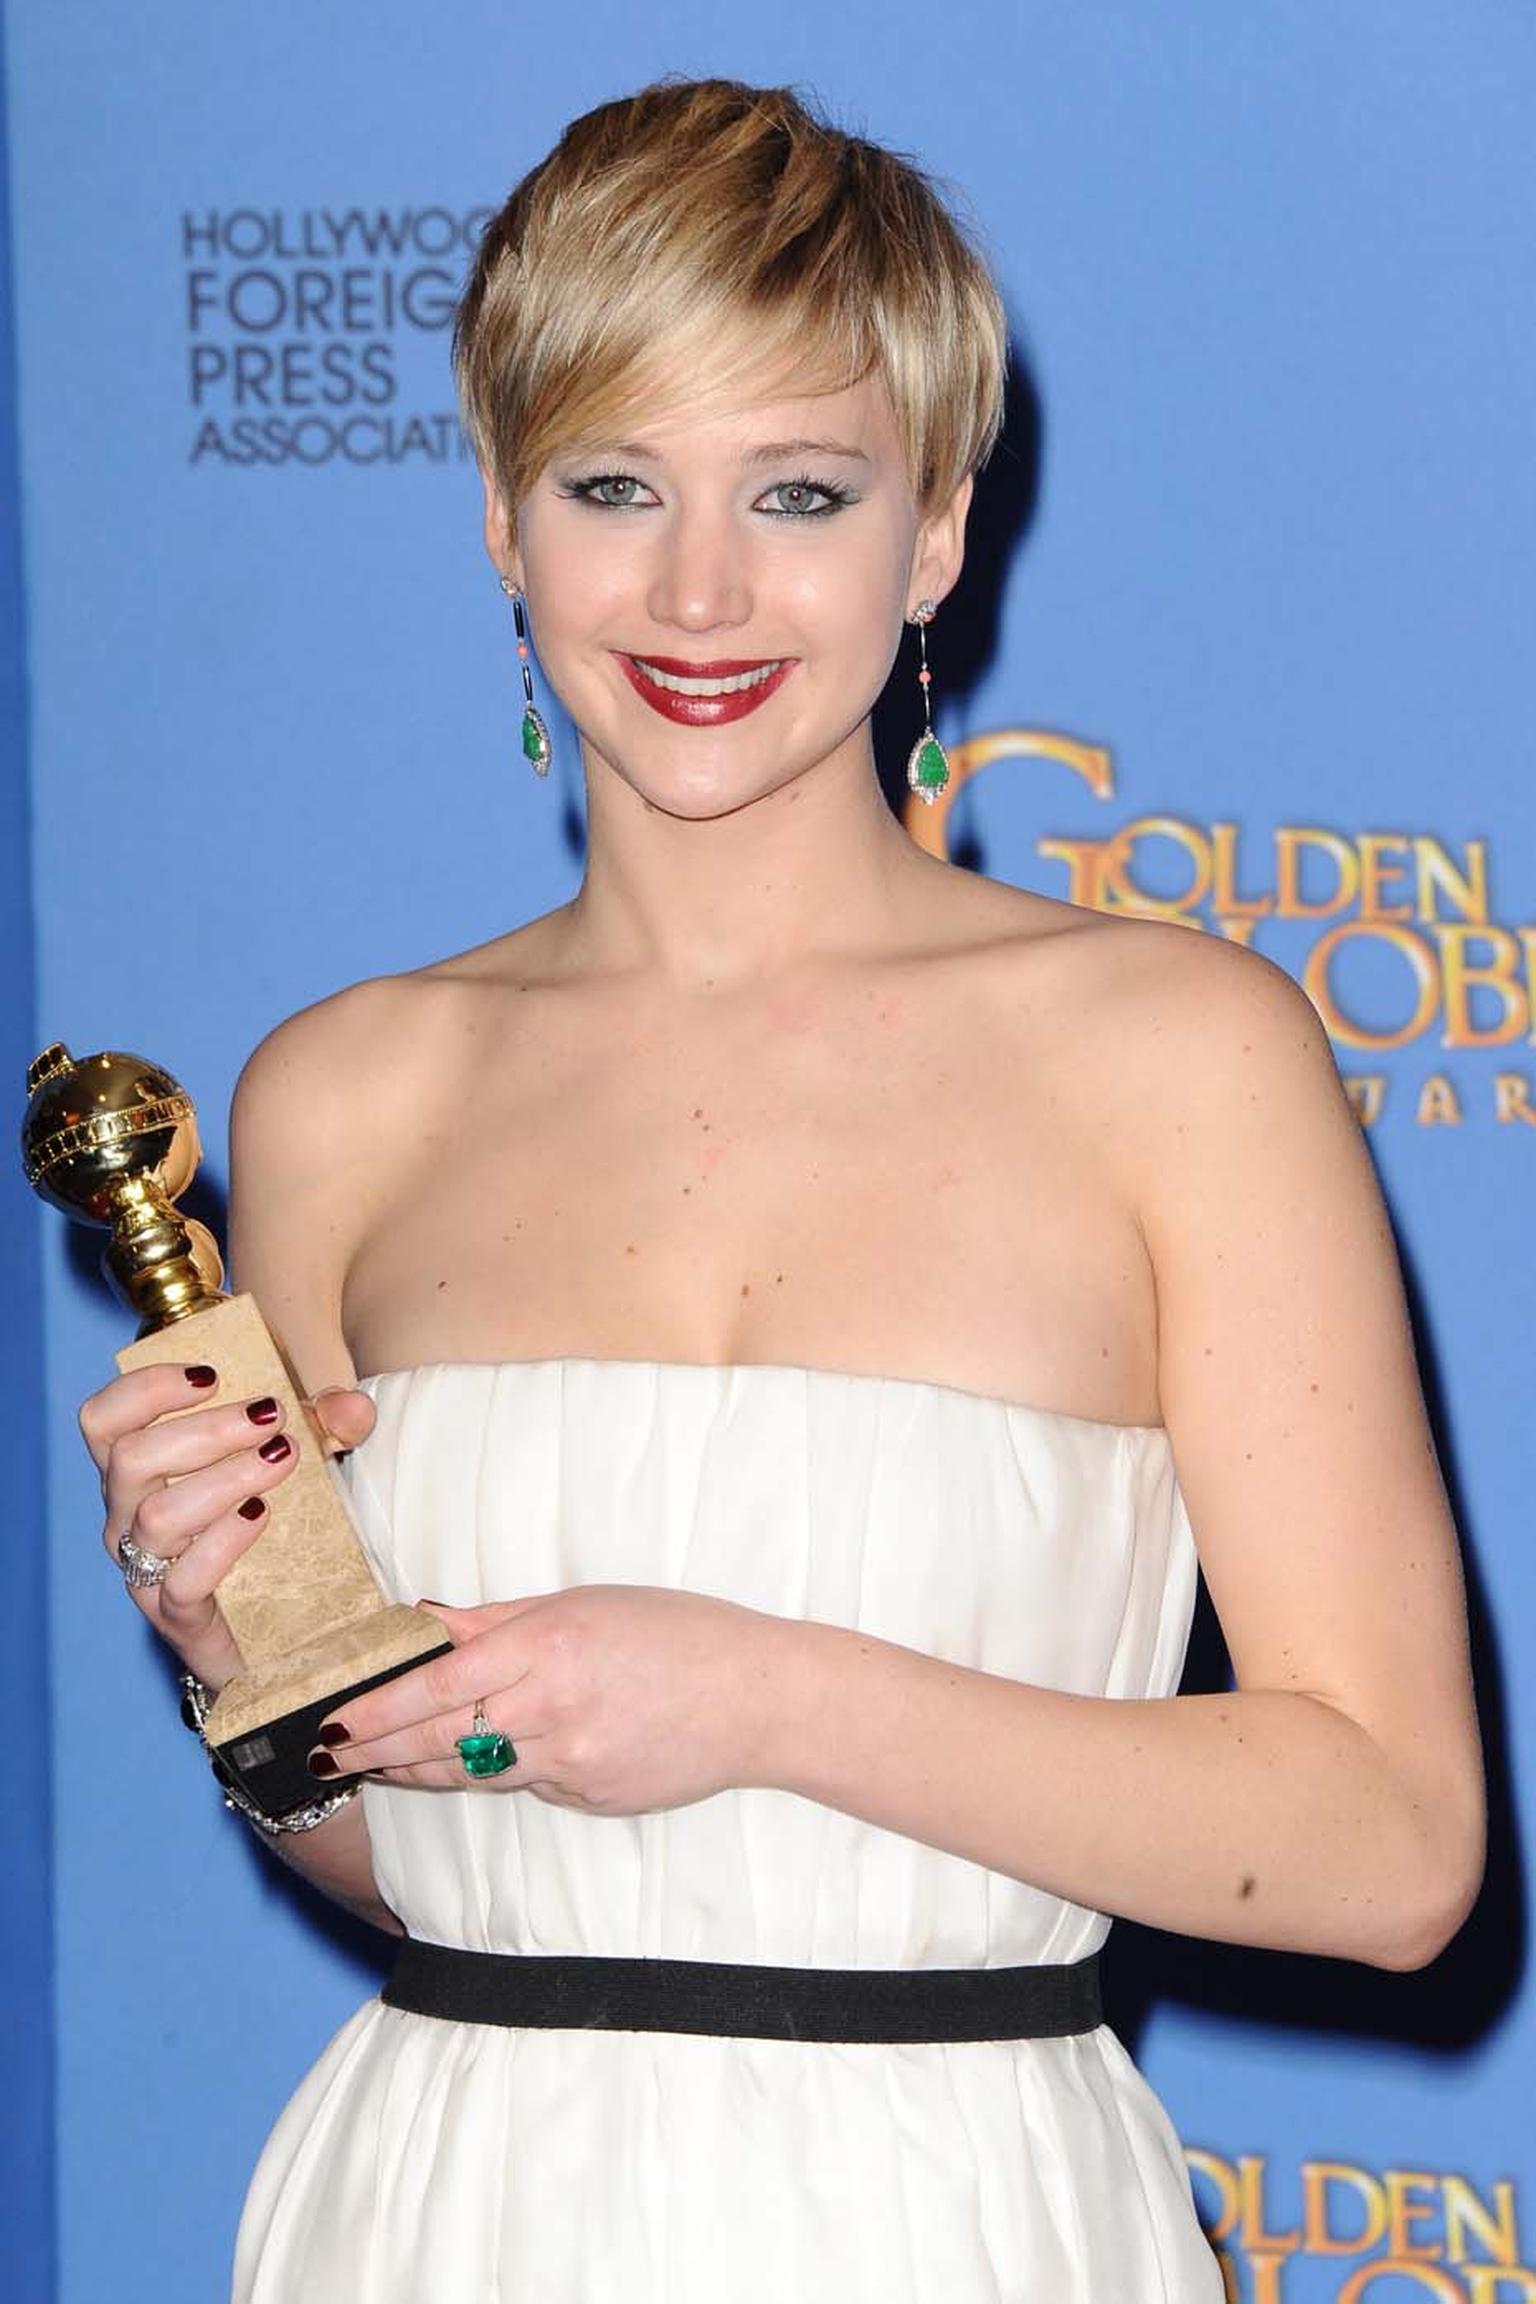 Winner of Actress in a Supporting Role in 'American Hustle', Jennifer Lawrence, opted for vintage Neil Lane jewels at the Golden Globes 2014